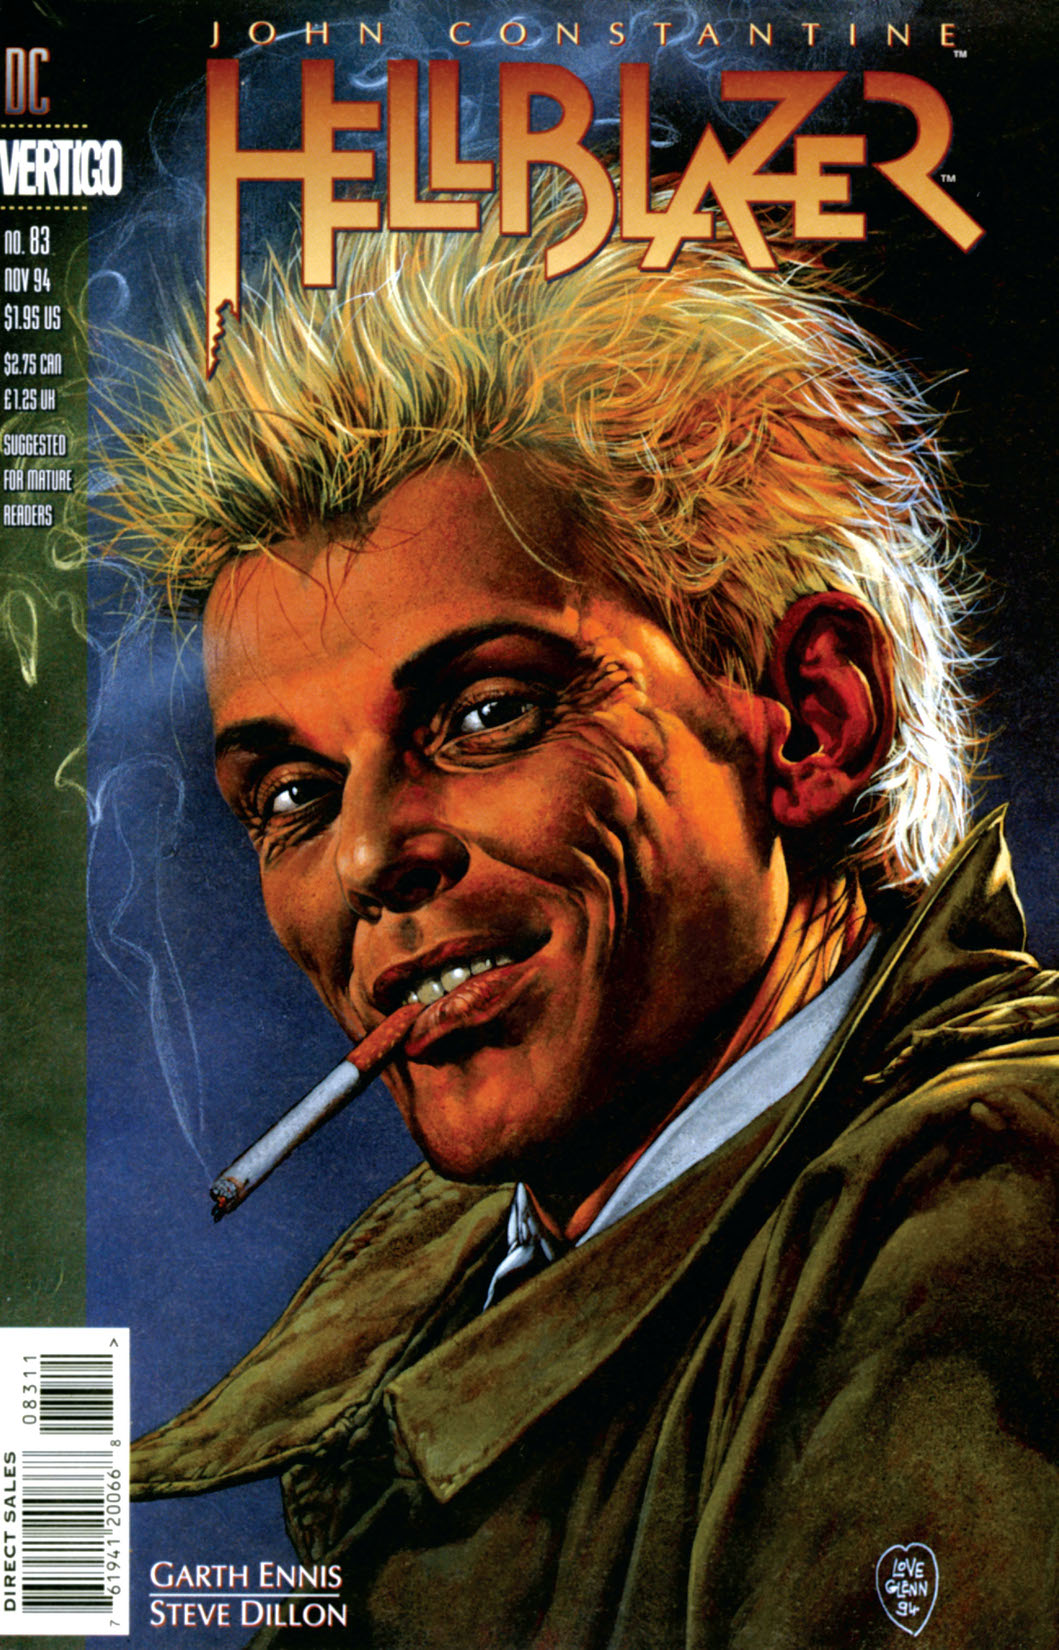 Hellblazer #83 preview images